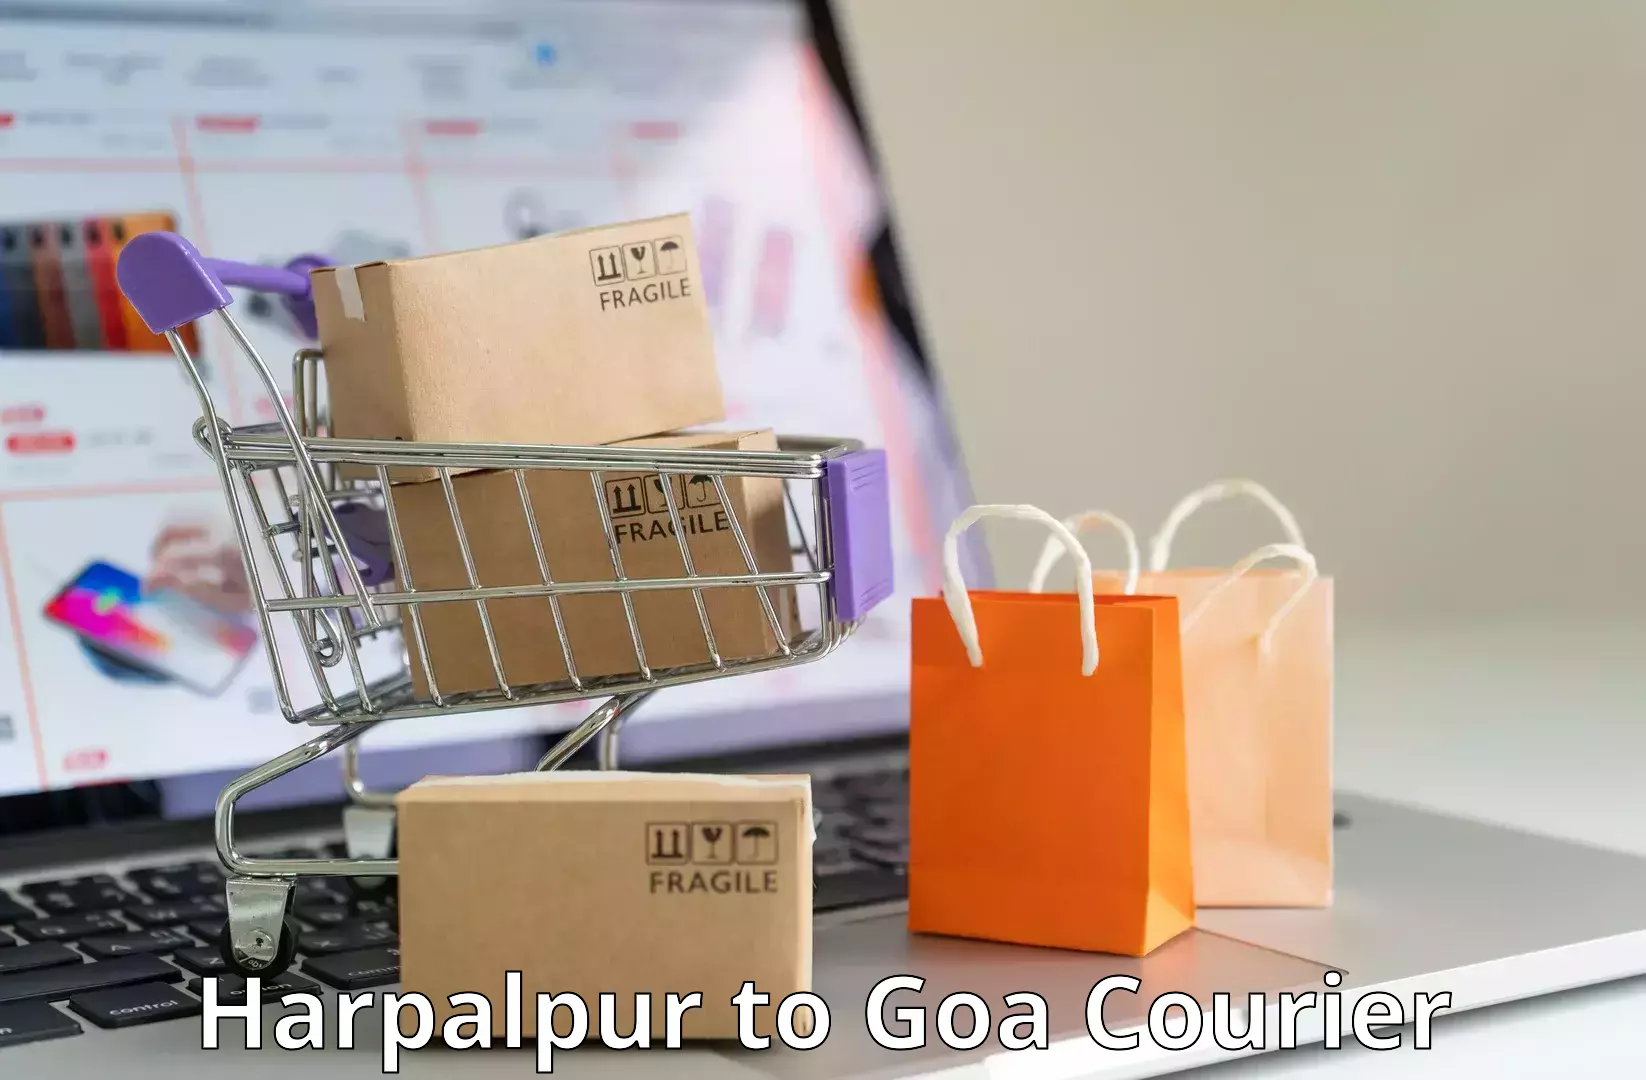 Global courier networks Harpalpur to Panjim